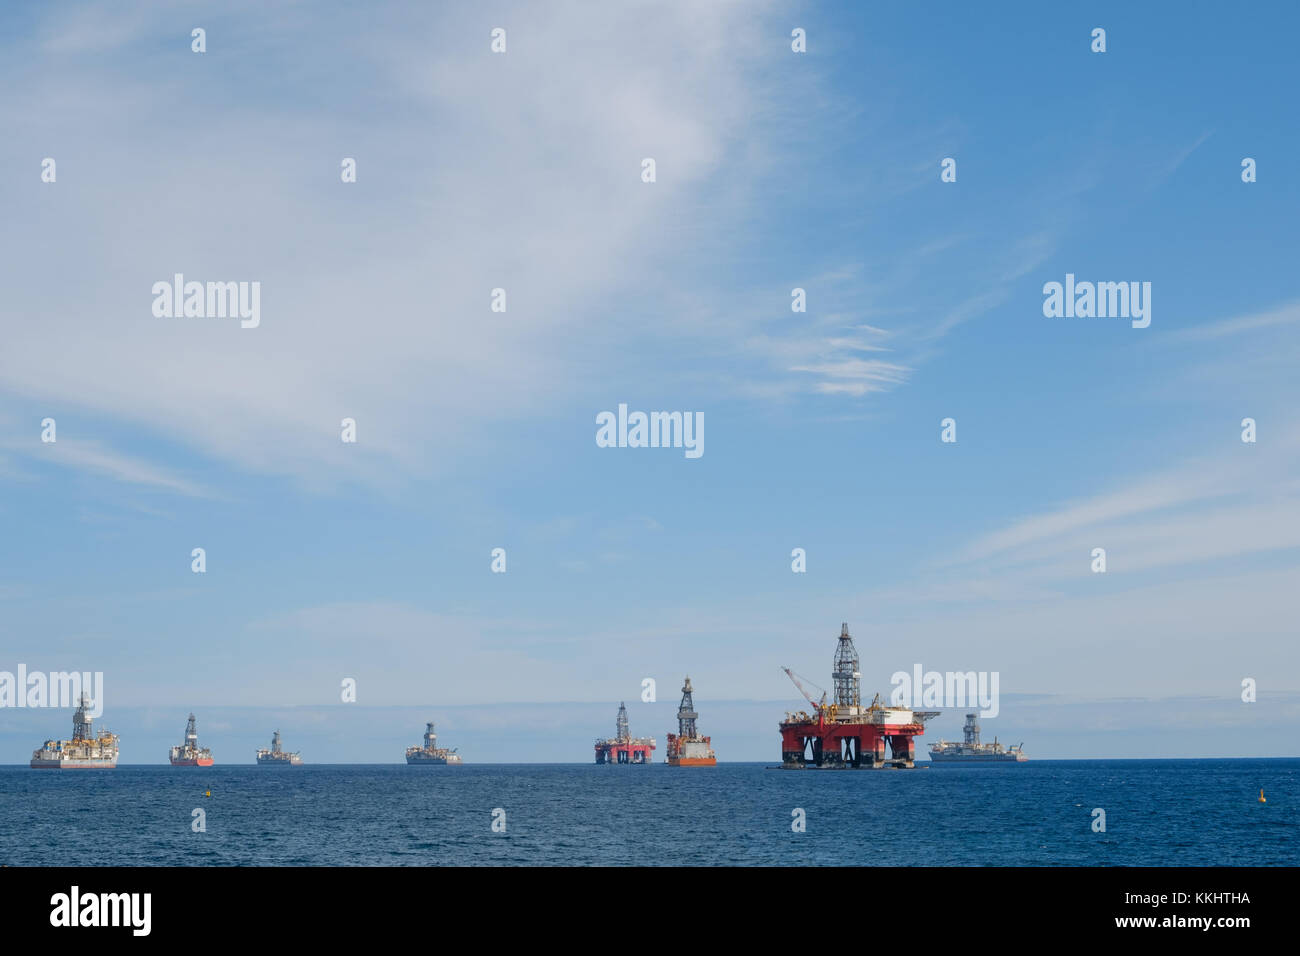 offshore drilling ships and platform on horizon Stock Photo